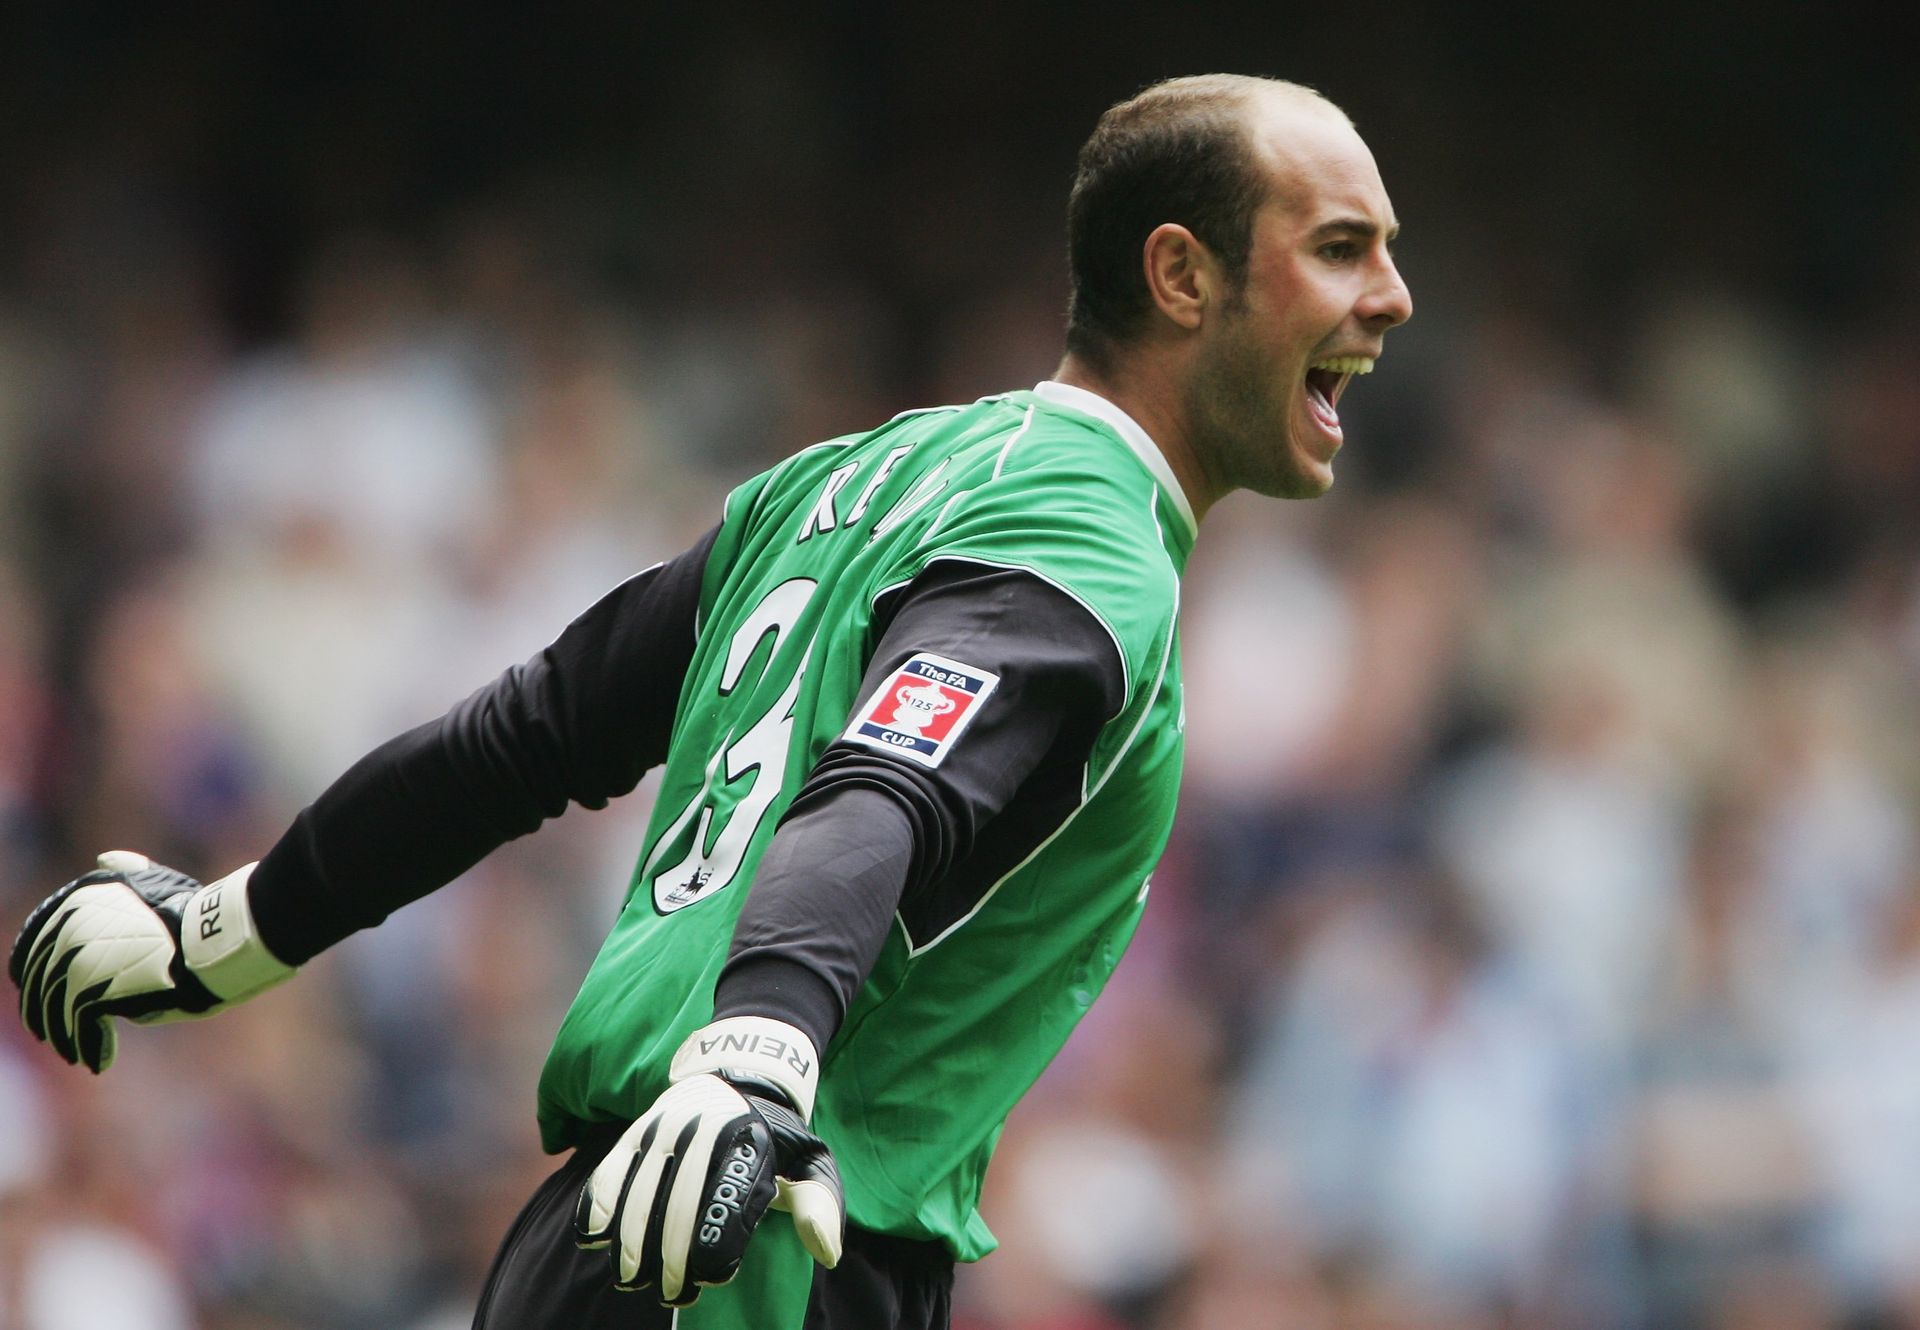 <p>                     One of the best Spanish goalkeepers of his generation, Pepe Reina was part of the European Championship-winning squads of 2008 and 2012 and also at the 2010 World Cup.                   </p>                                      <p>                     At club level, he impressed at Villarreal before spending nine seasons at Liverpool from 2005 to 2014. He kept 20 clean sheets to win the Golden Glove in his first season and although he made mistakes in the 2006 FA Cup final against West Ham, he redeemed himself by saving three out of four penalties in the Reds' shootout win.                   </p>